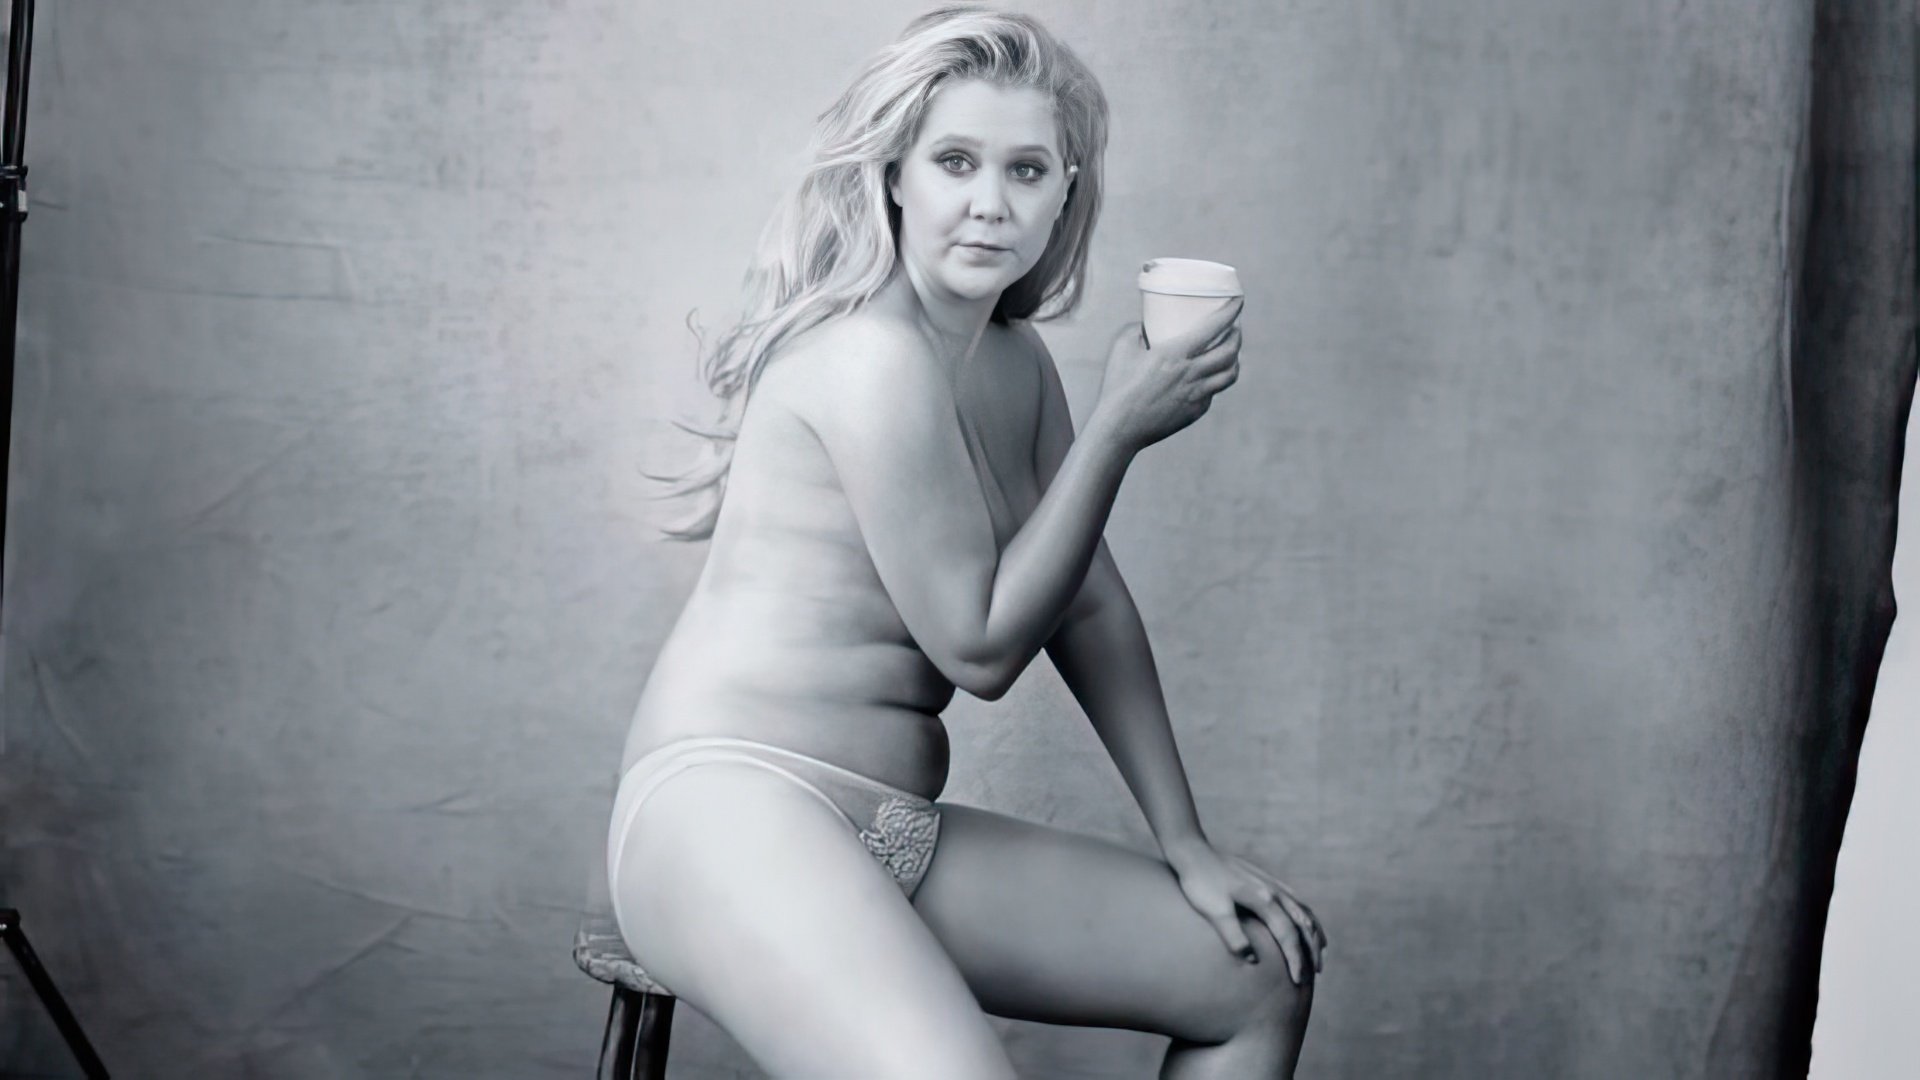 Amy Schumer breaks stereotypes and glass ceilings